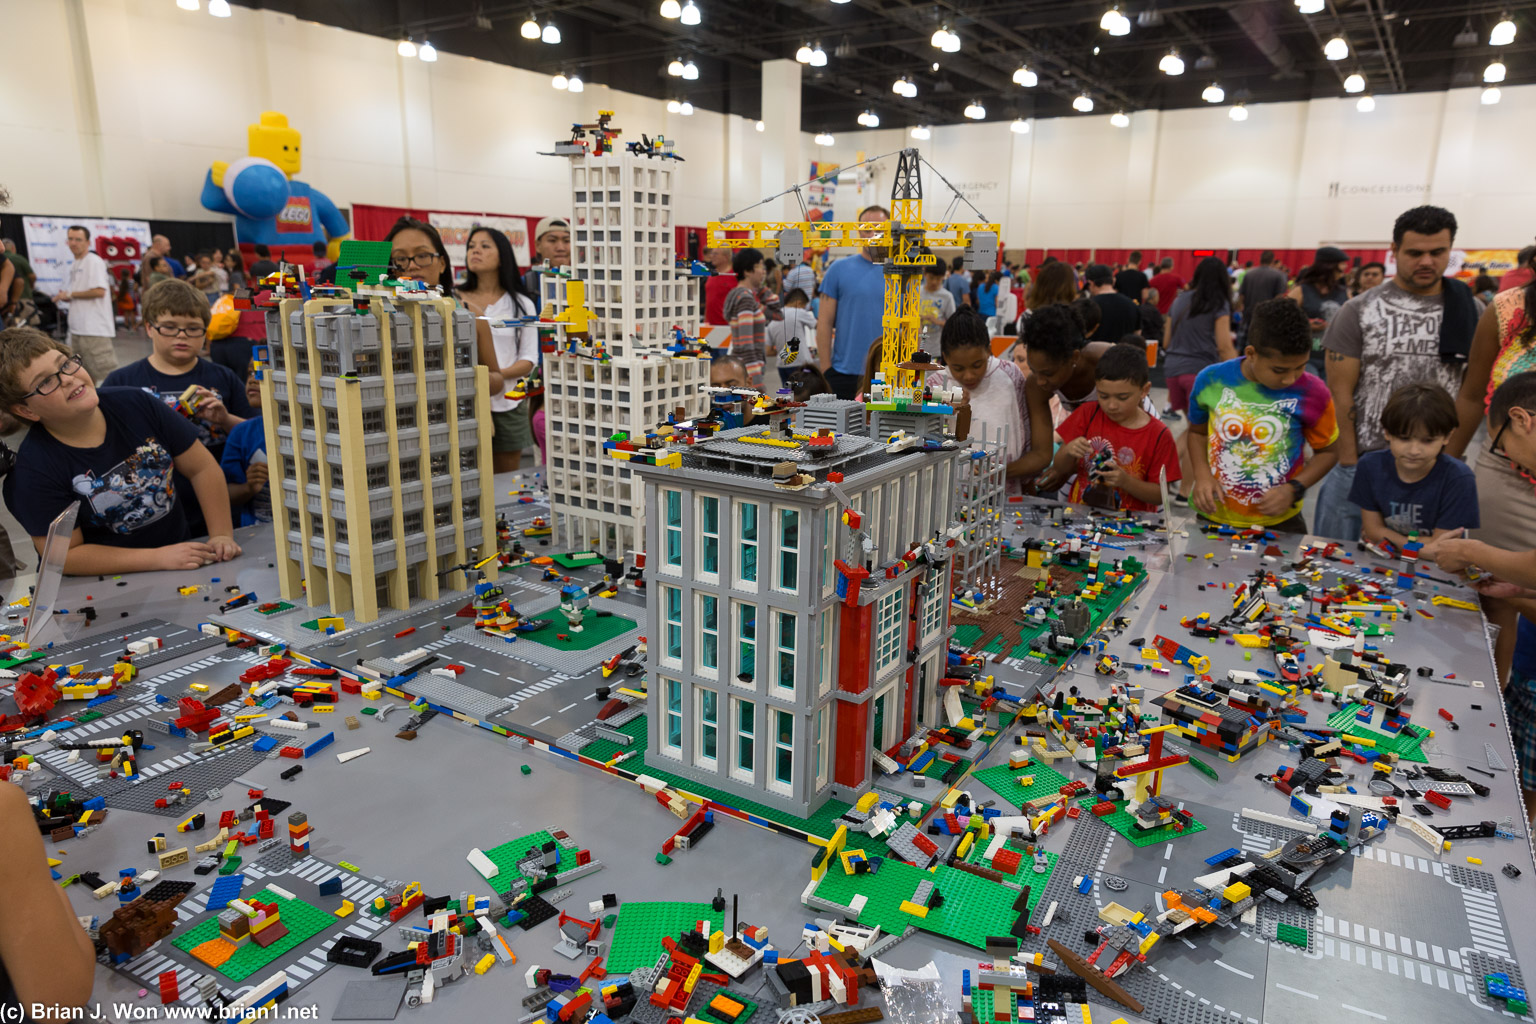 Another big Lego play area. Lego City.